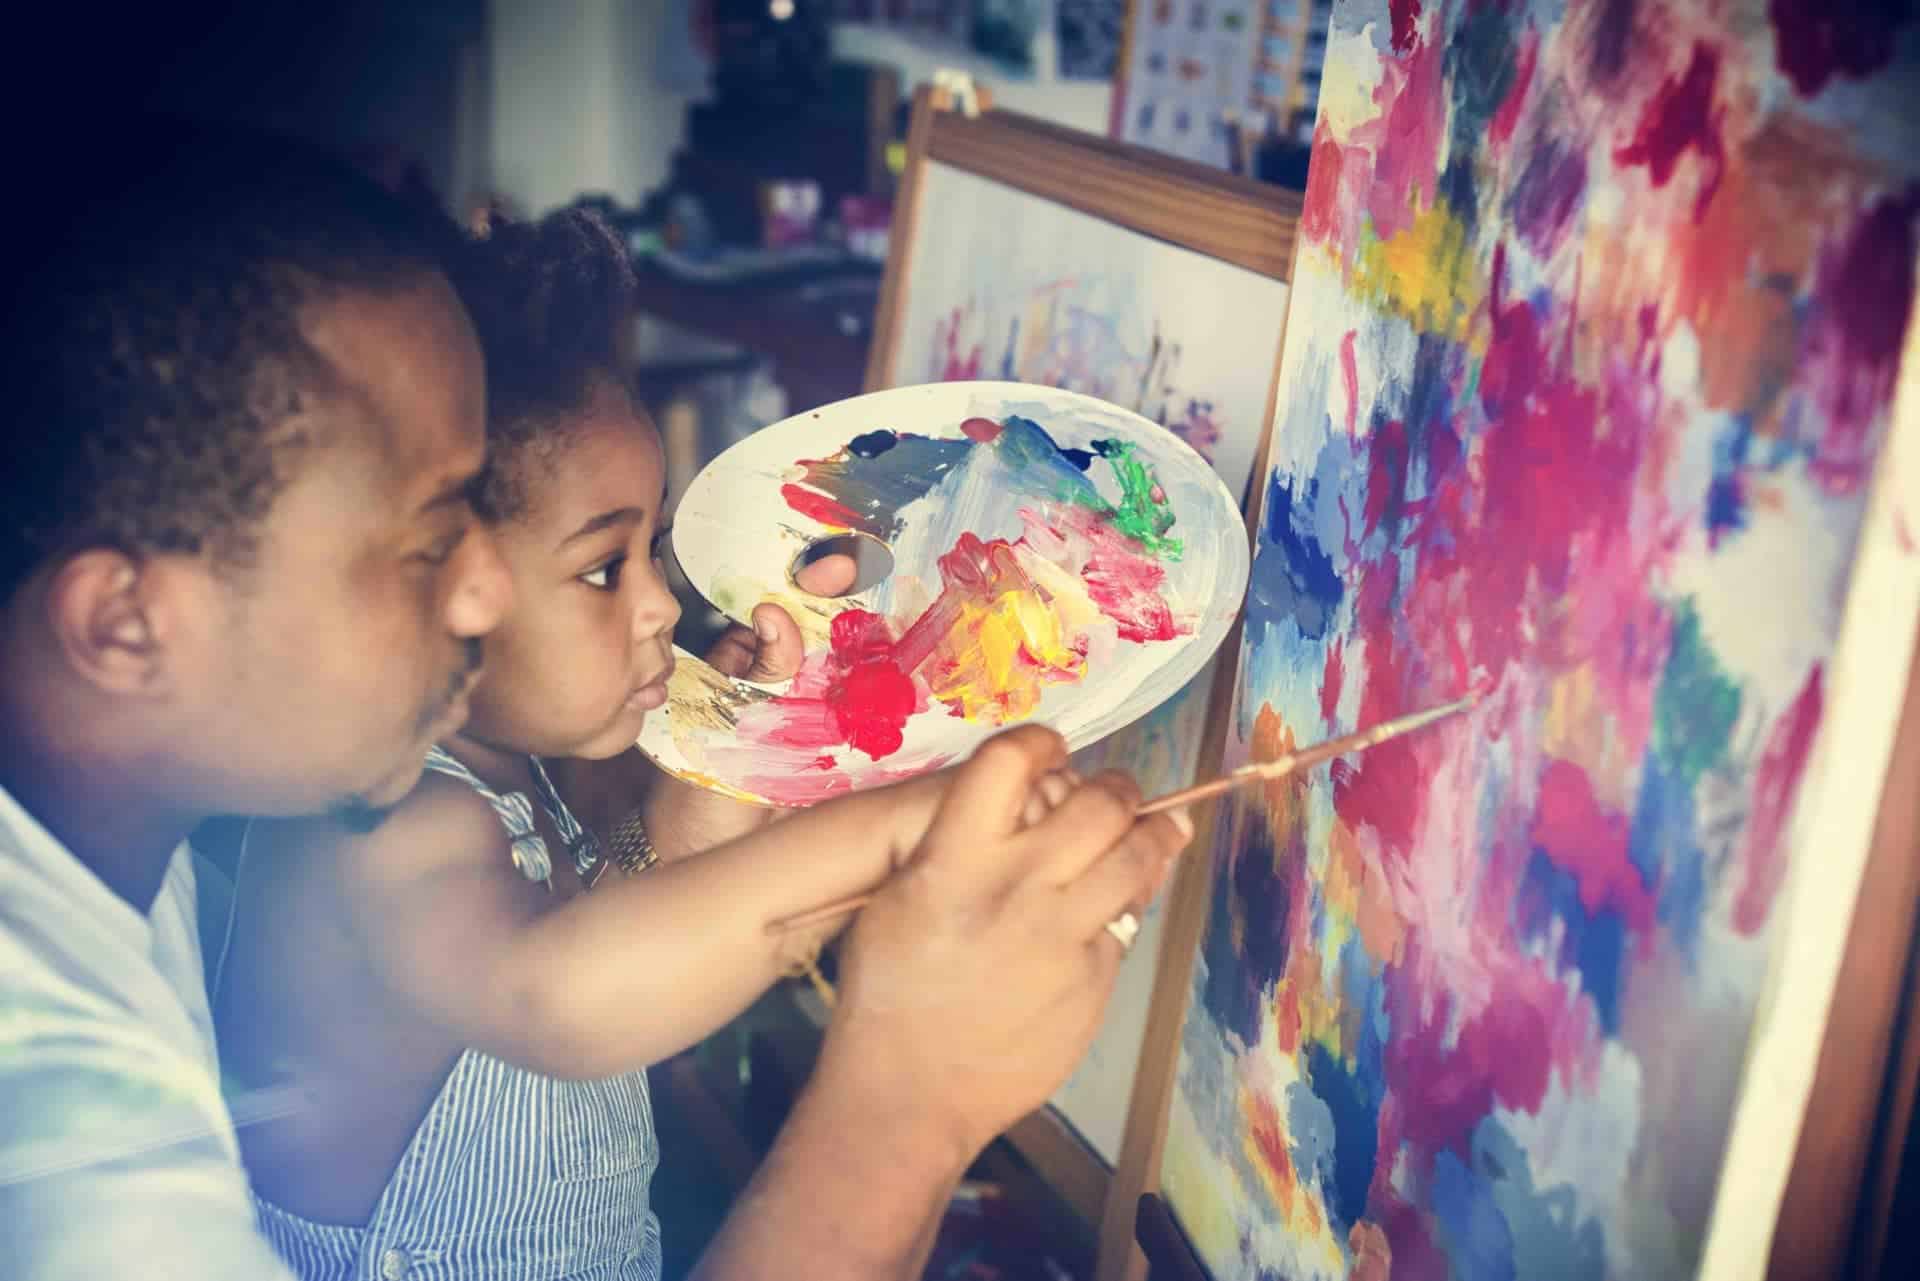 A father helps his toddler with her painting, representing the care that integral ecology requires to be focused upon the human person